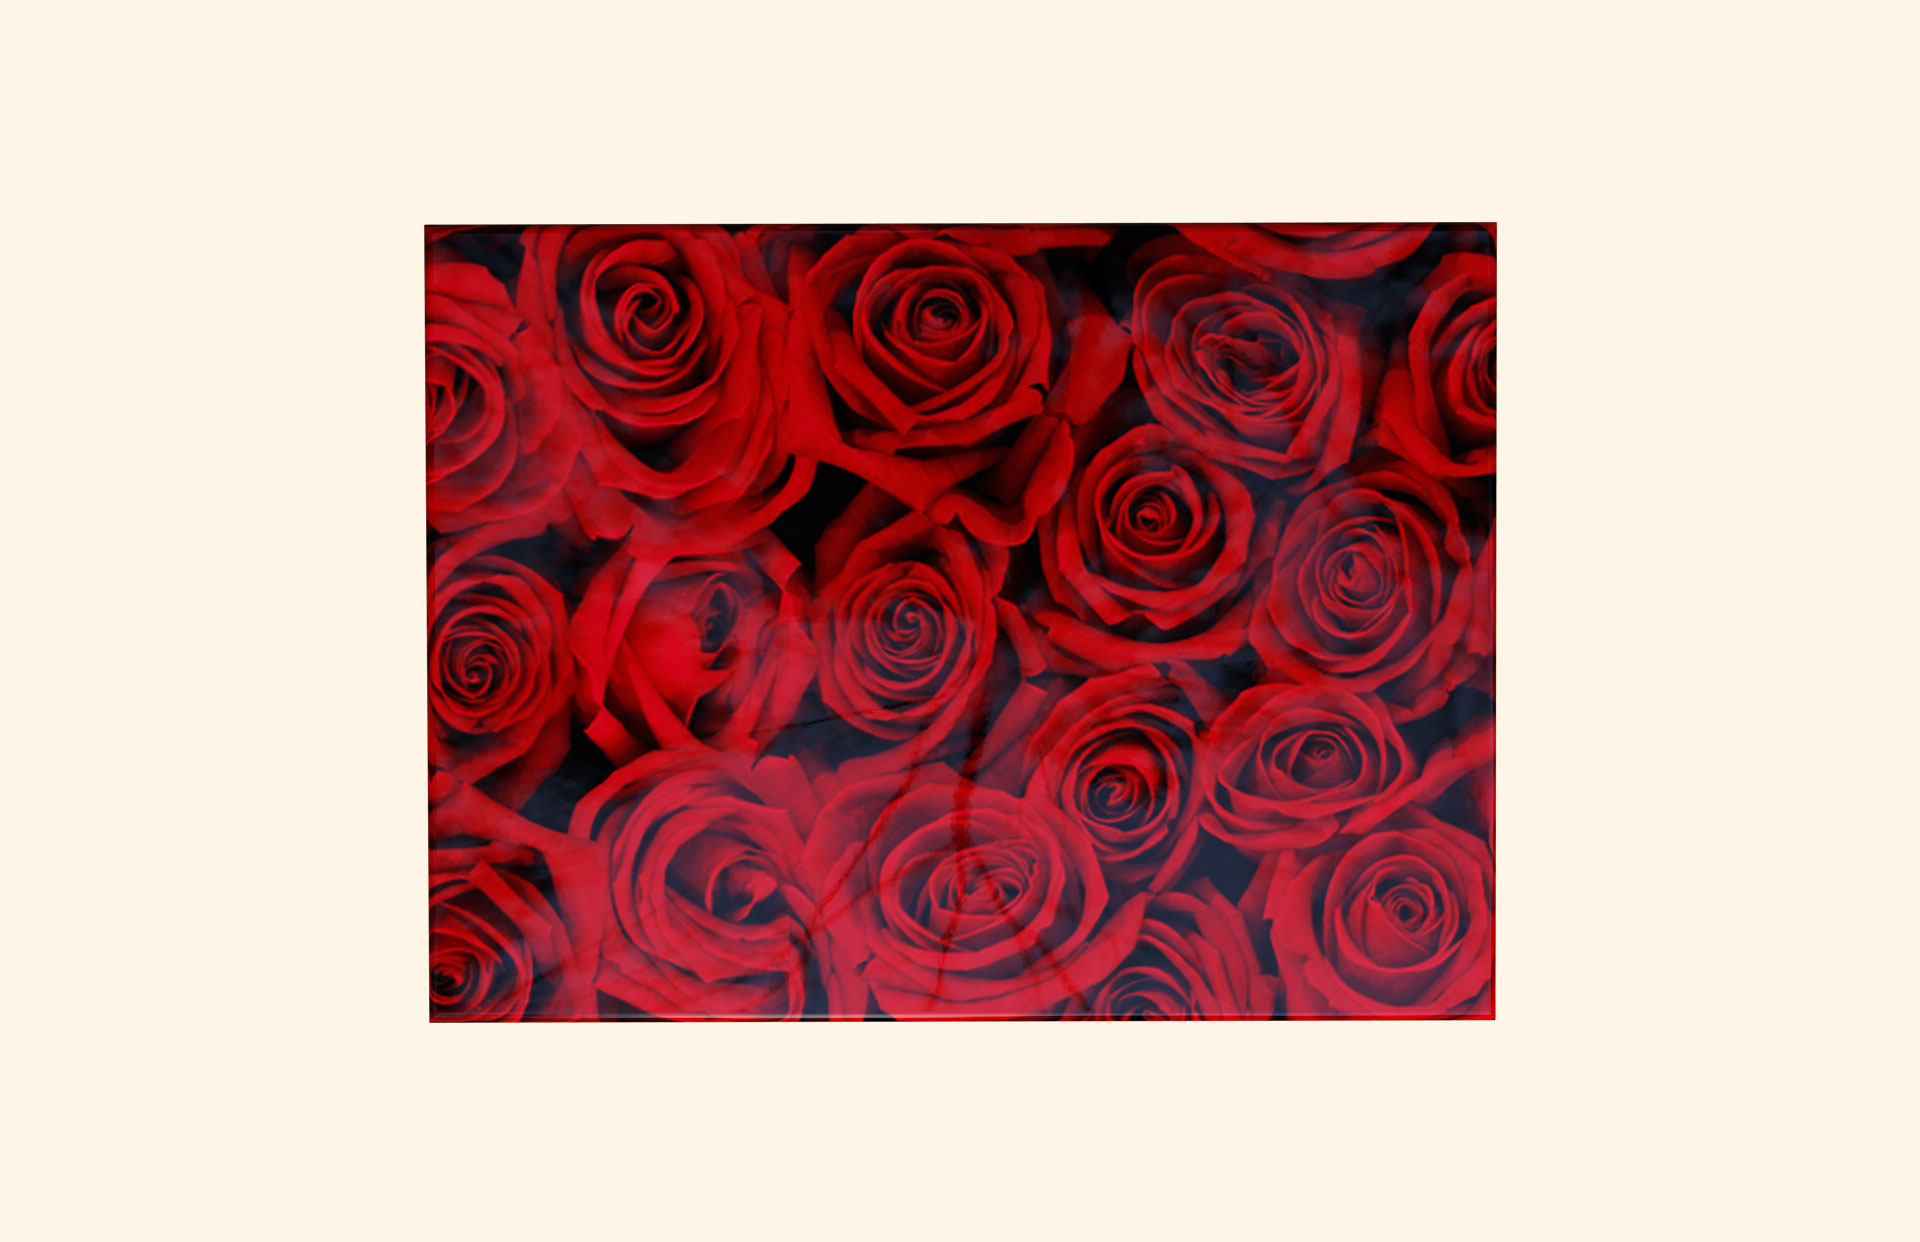 Rows of Roses adult ashes casket top view